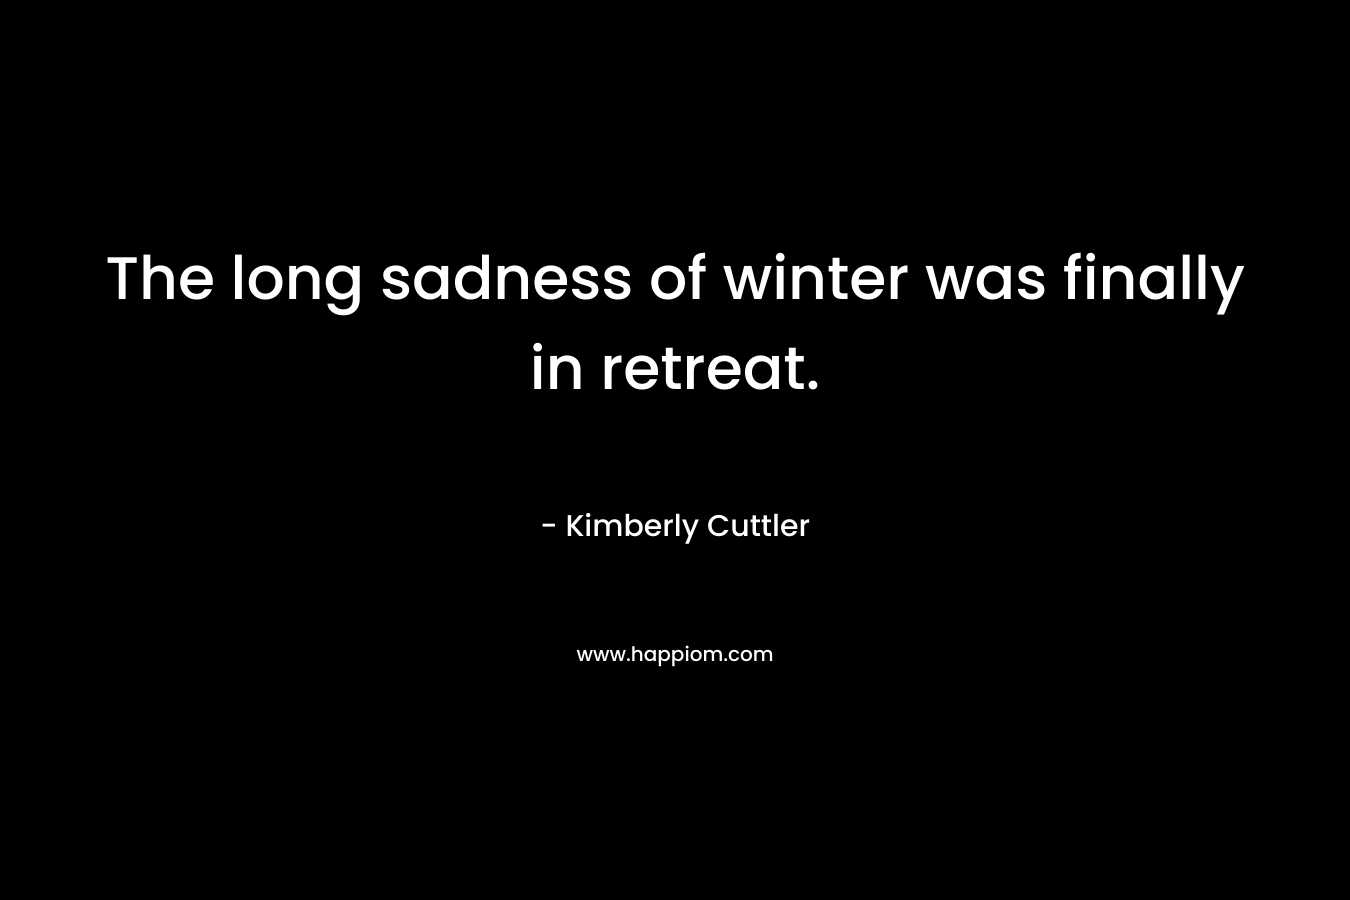 The long sadness of winter was finally in retreat. – Kimberly Cuttler